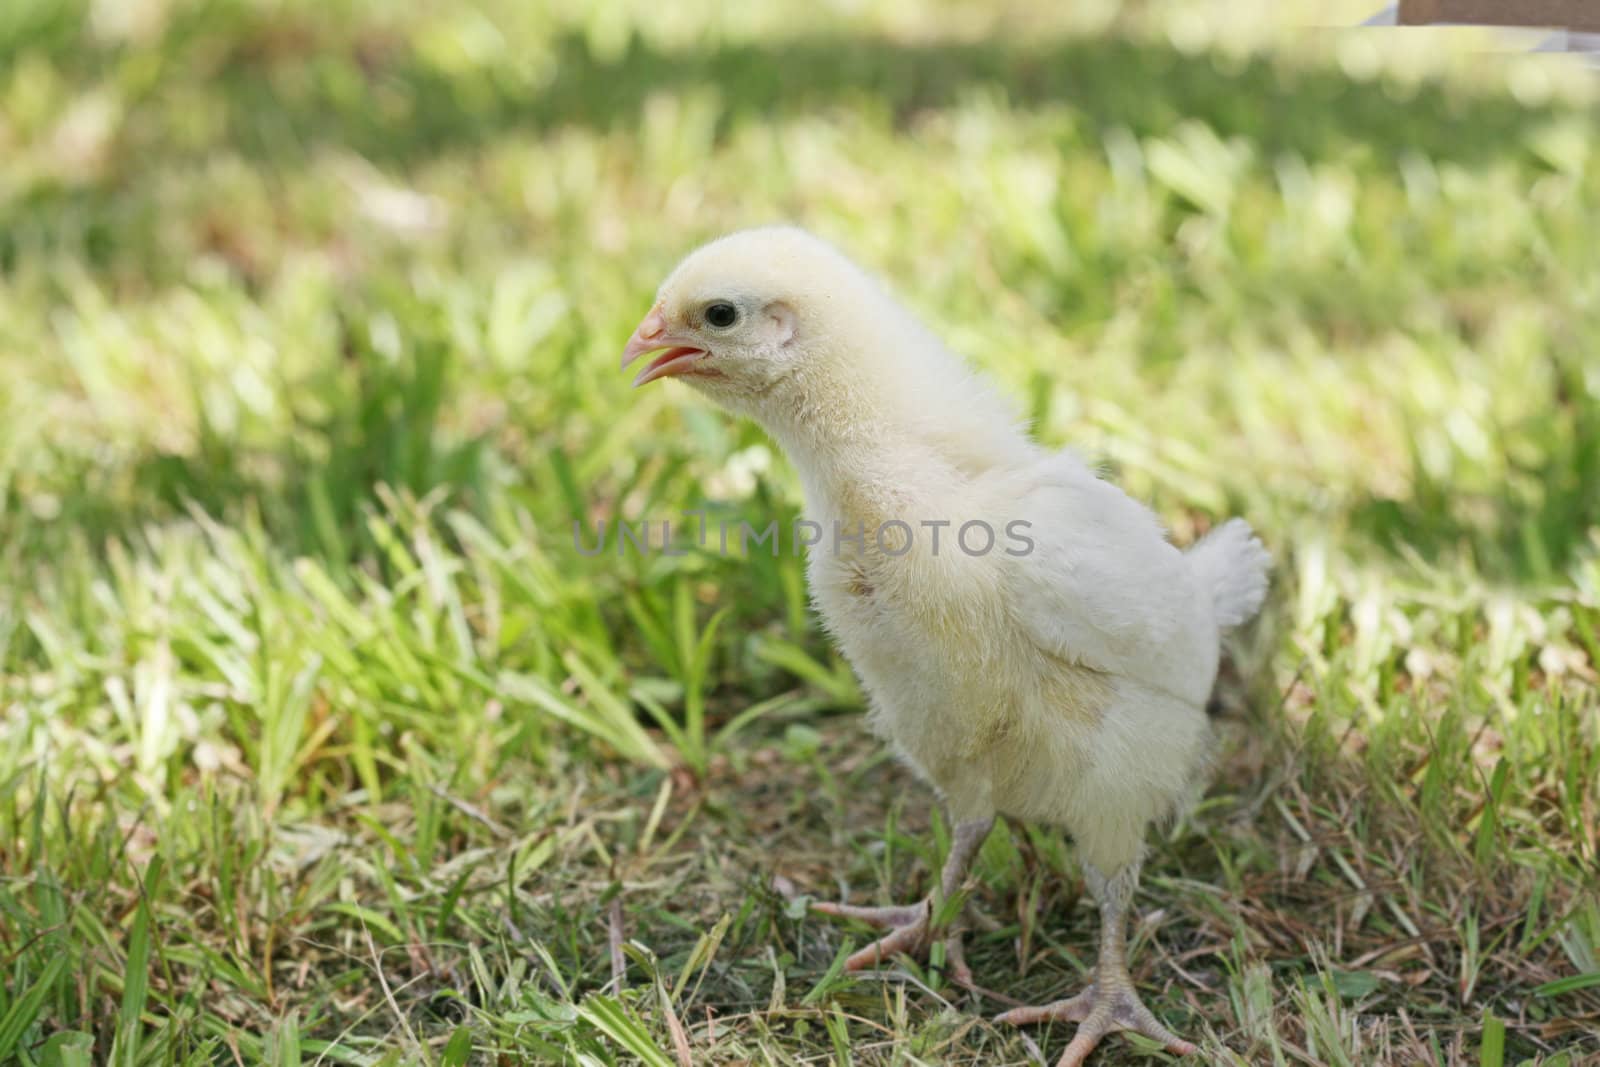 Baby chick standing in grass